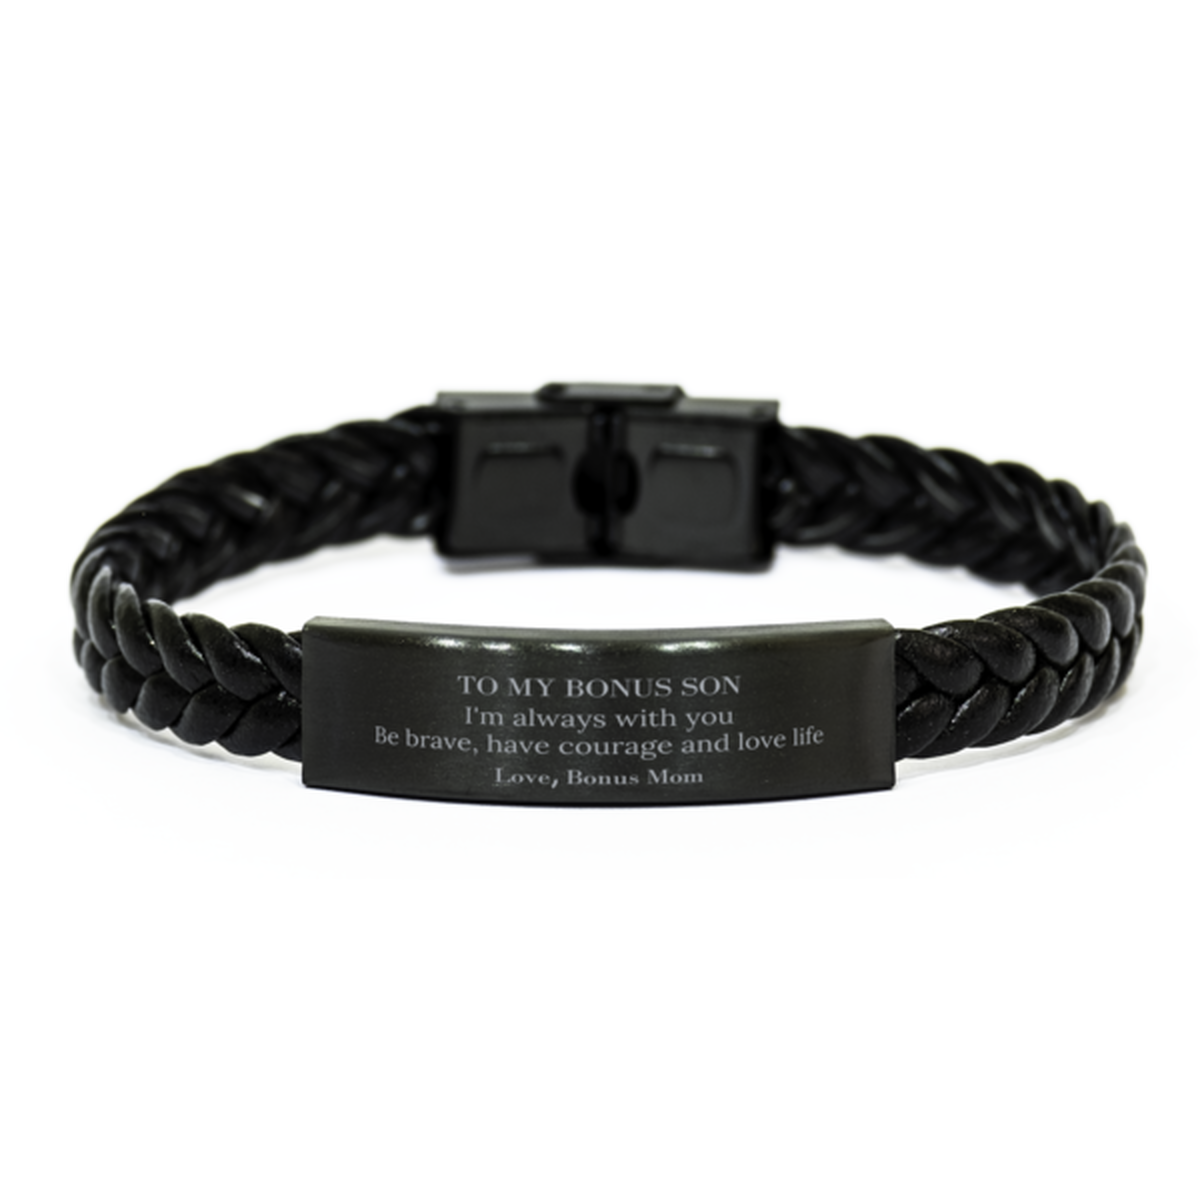 To My Bonus Son Gifts from Bonus Mom, Unique Braided Leather Bracelet Inspirational Christmas Birthday Graduation Gifts for Bonus Son I'm always with you. Be brave, have courage and love life. Love, Bonus Mom